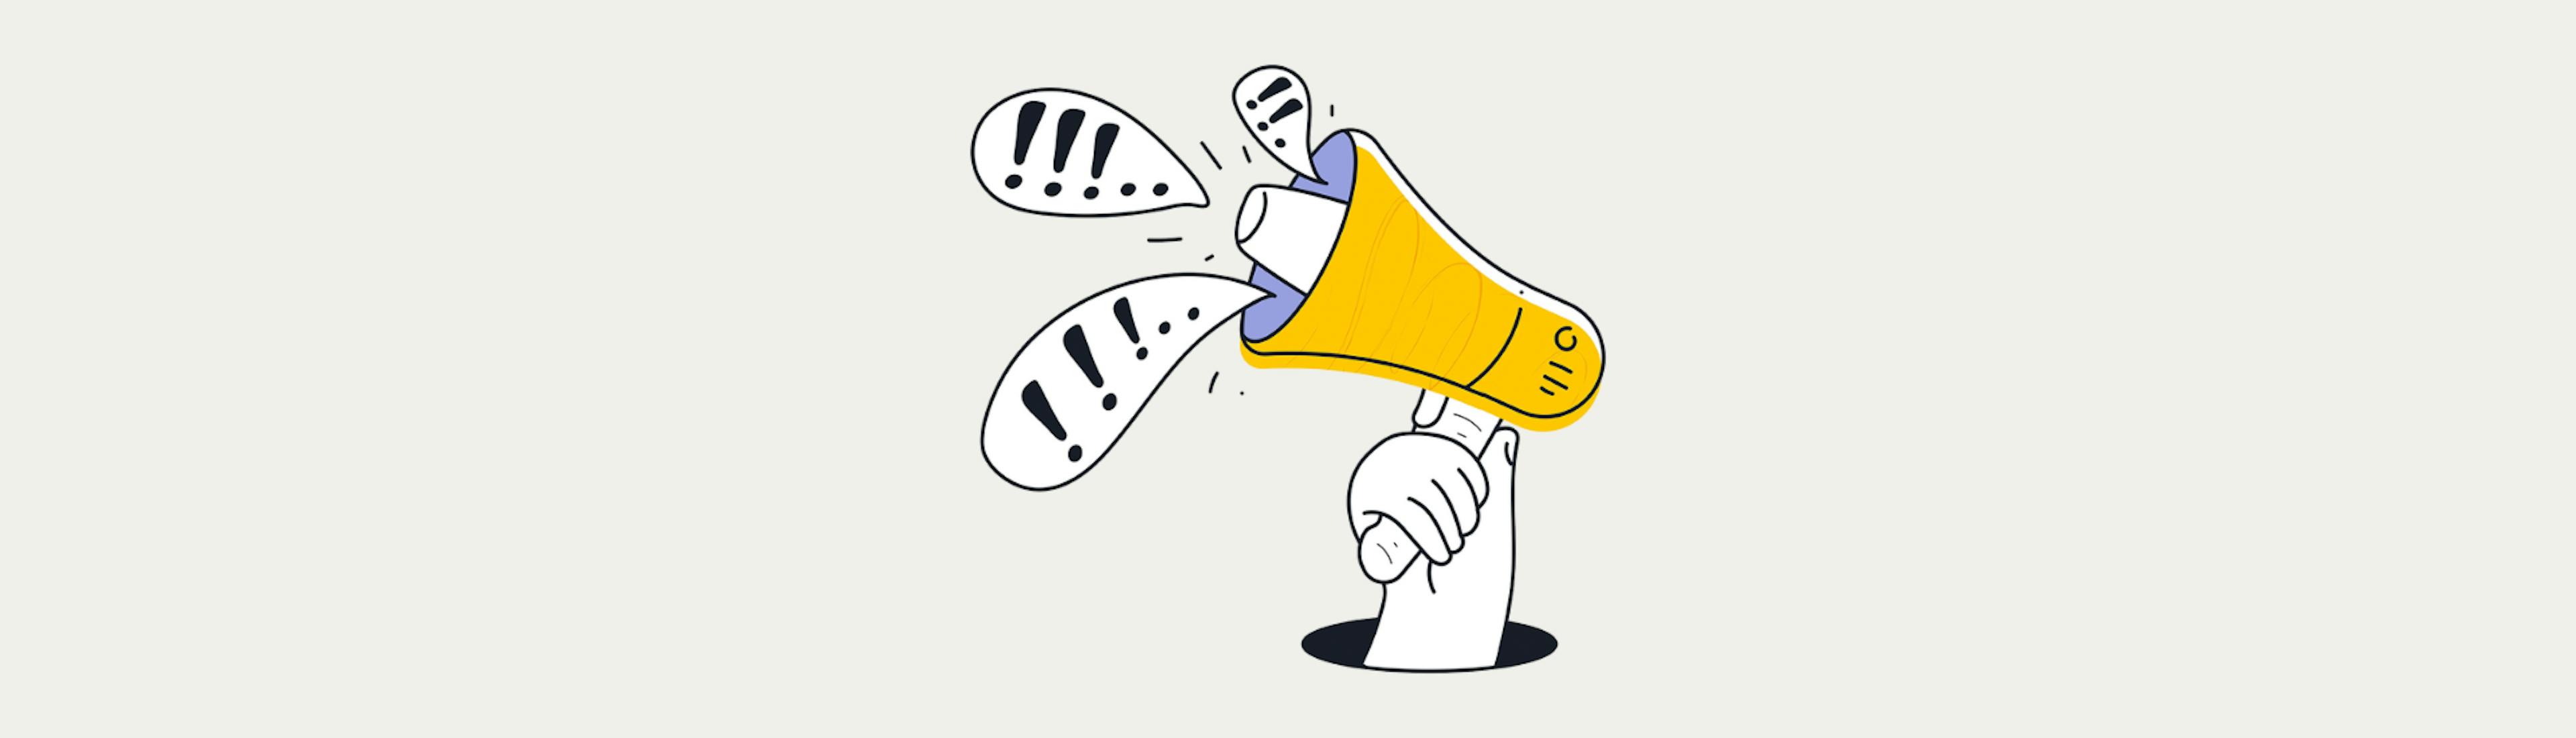 Illustration. A hand with megaphone comes out of a black hole. 3 text clouds with exclamation marks come out of the megaphone.